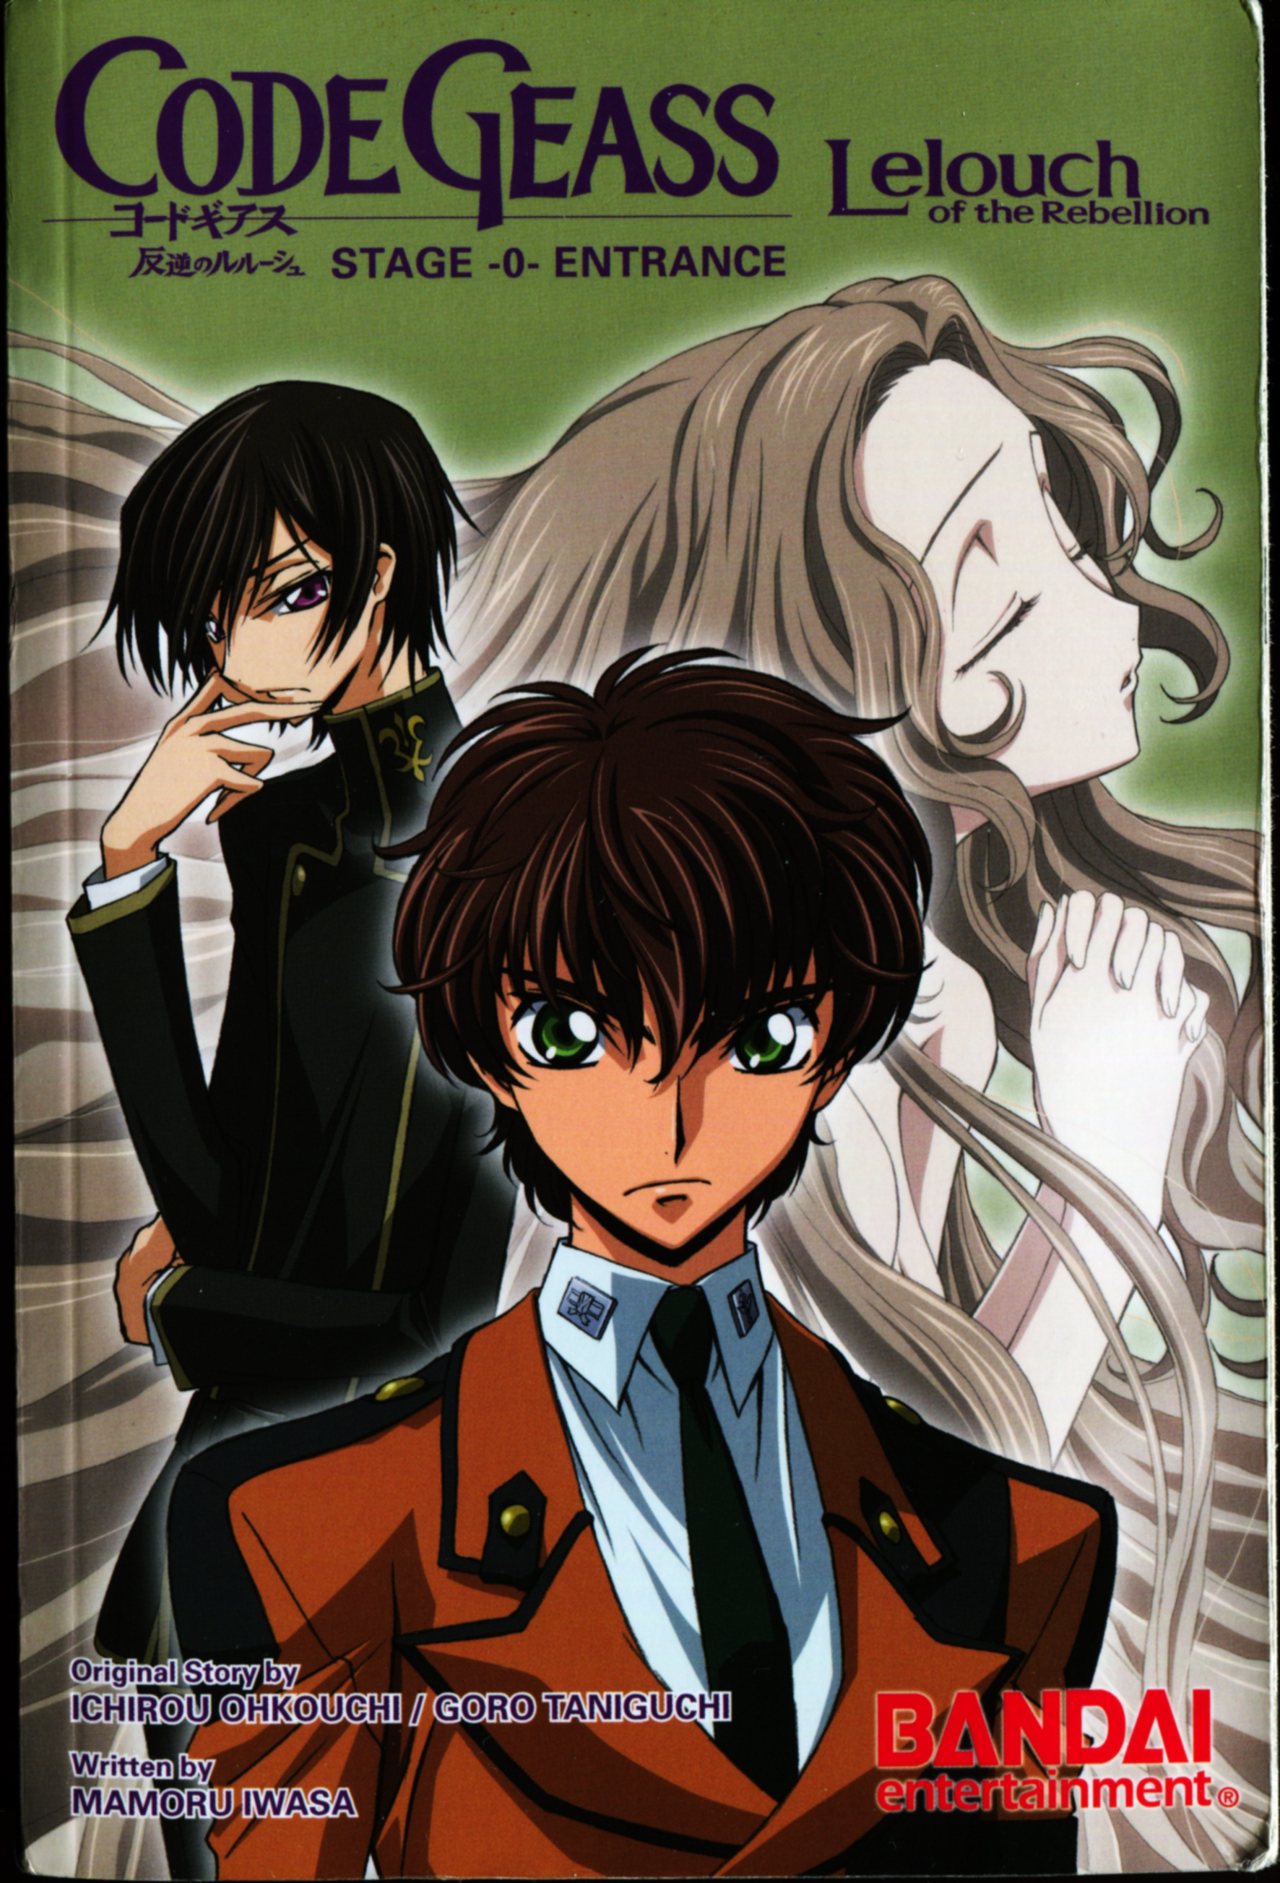 CREATOR OF CODE GEASS DELIVERED THE BEST SKATEBOARDING ANIME!